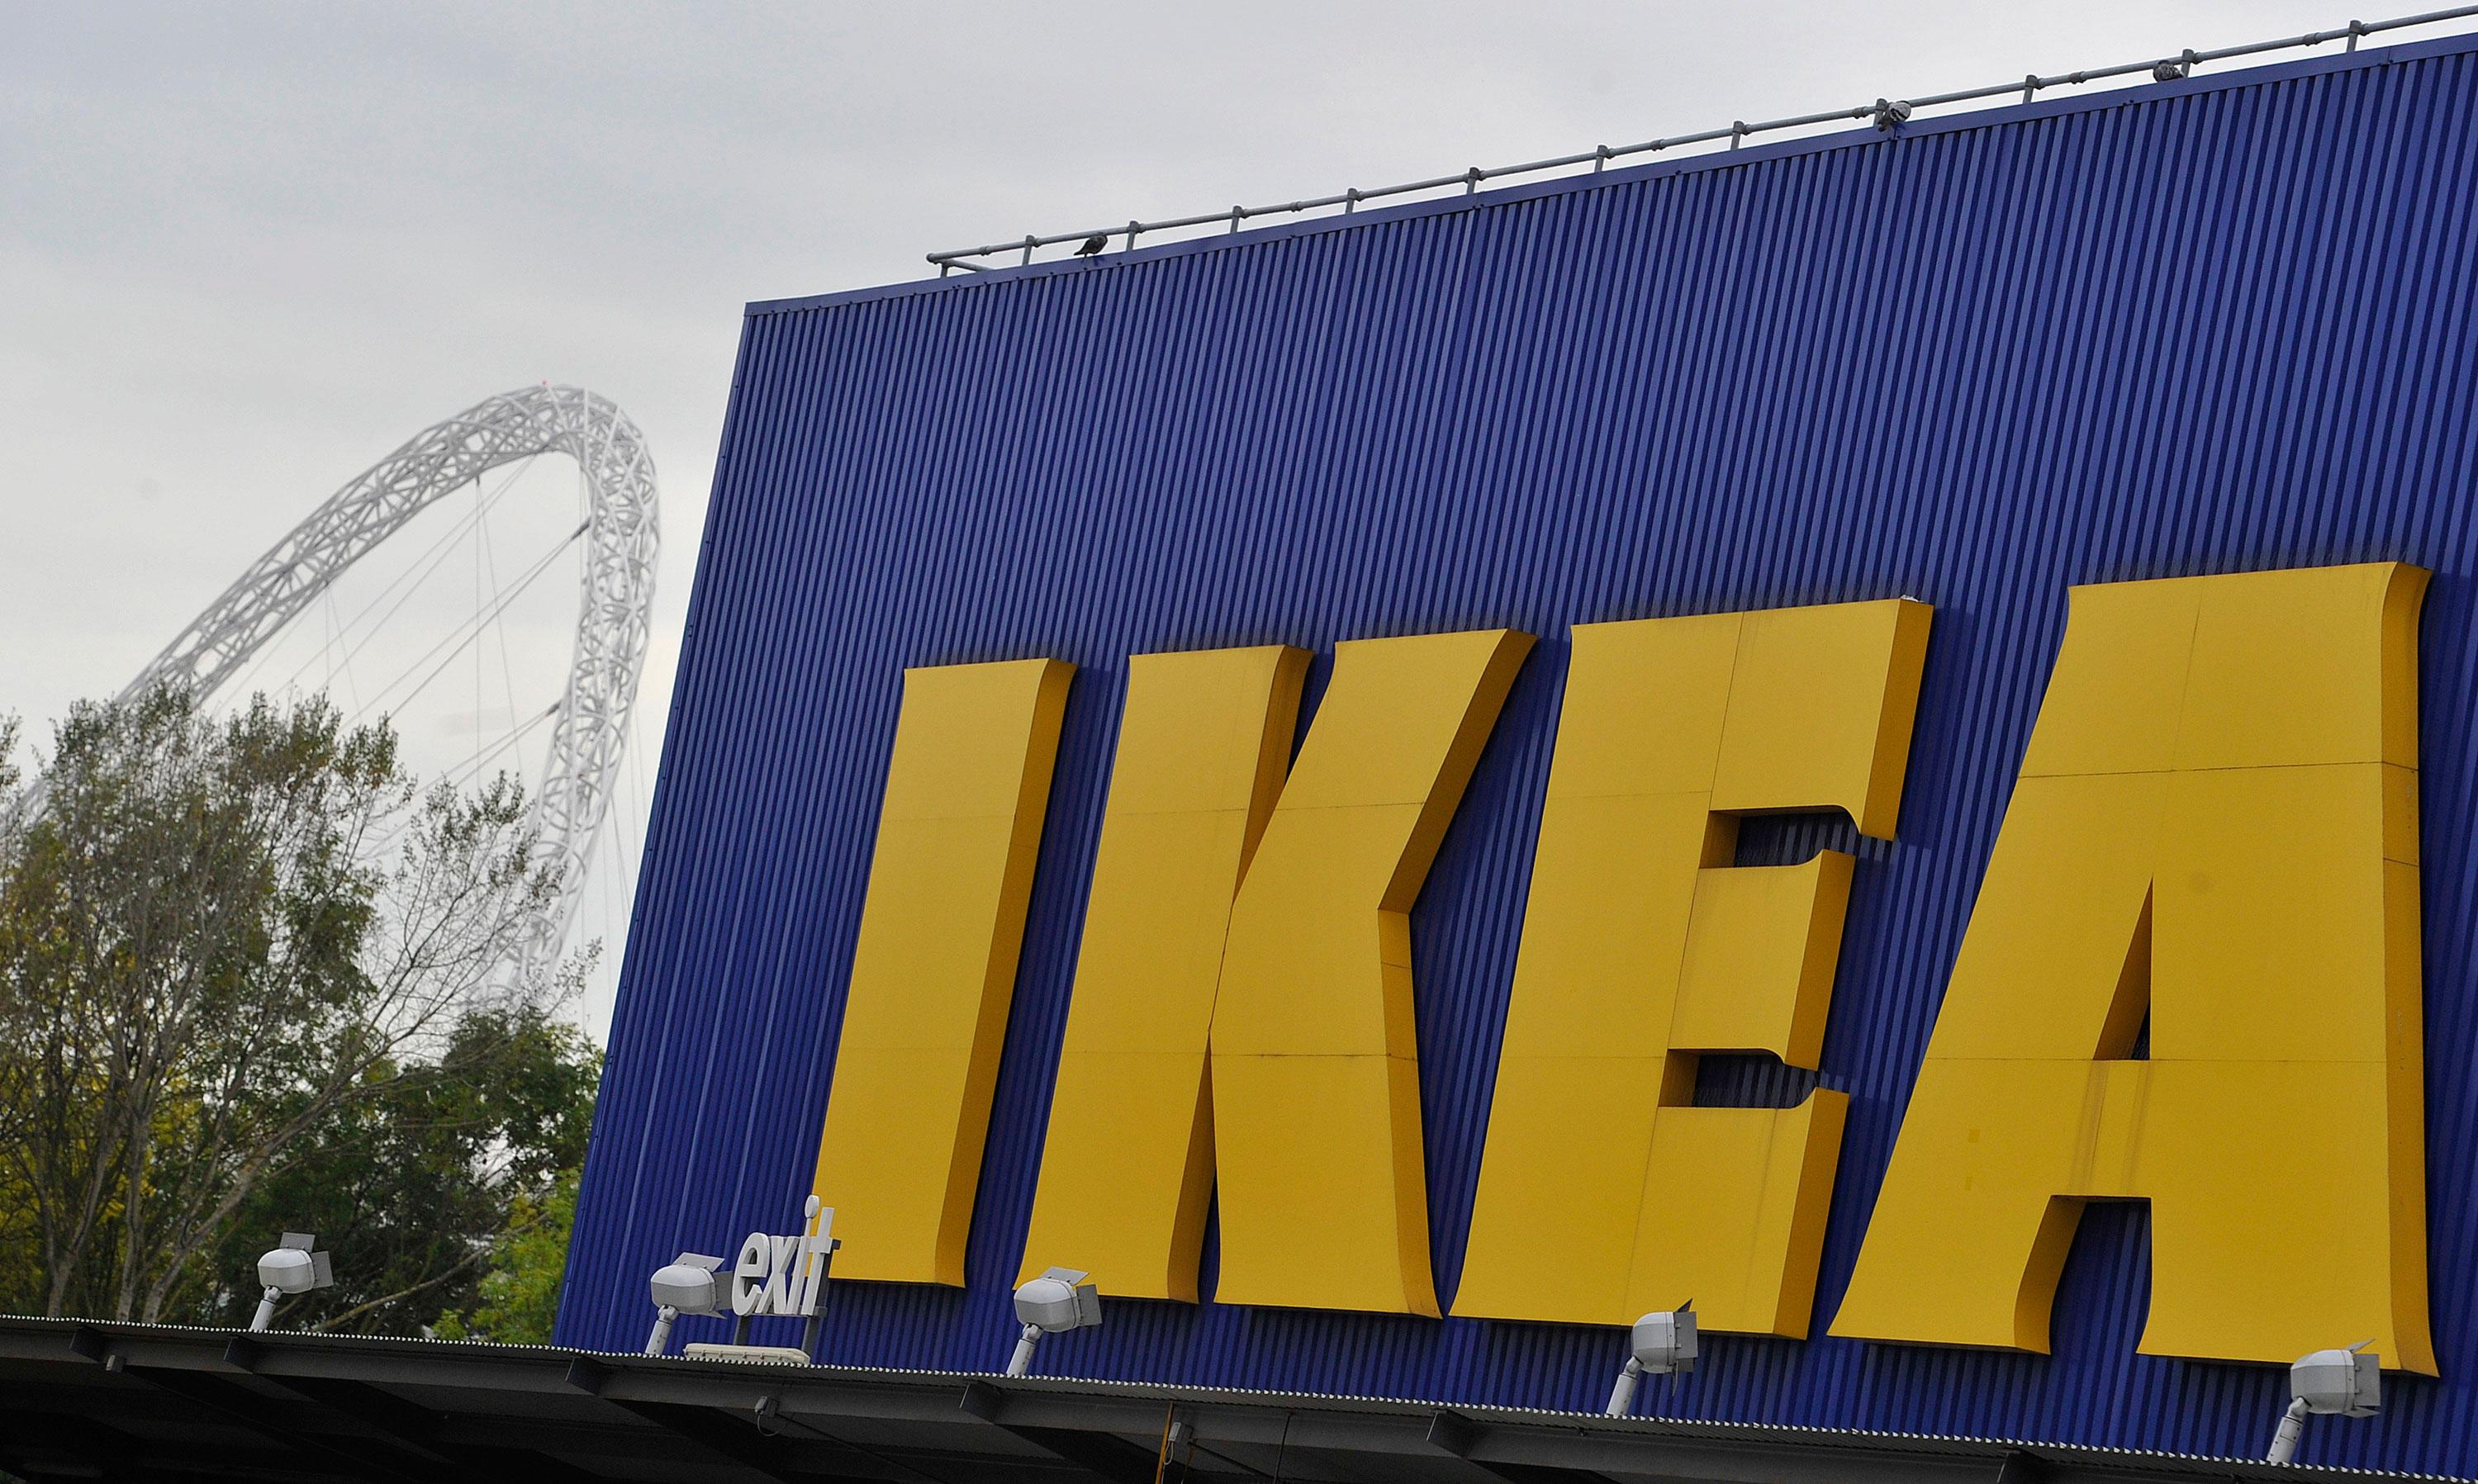 Furniture retail giant IKEA moves a step closer to enter India; buys land in Hyderabad